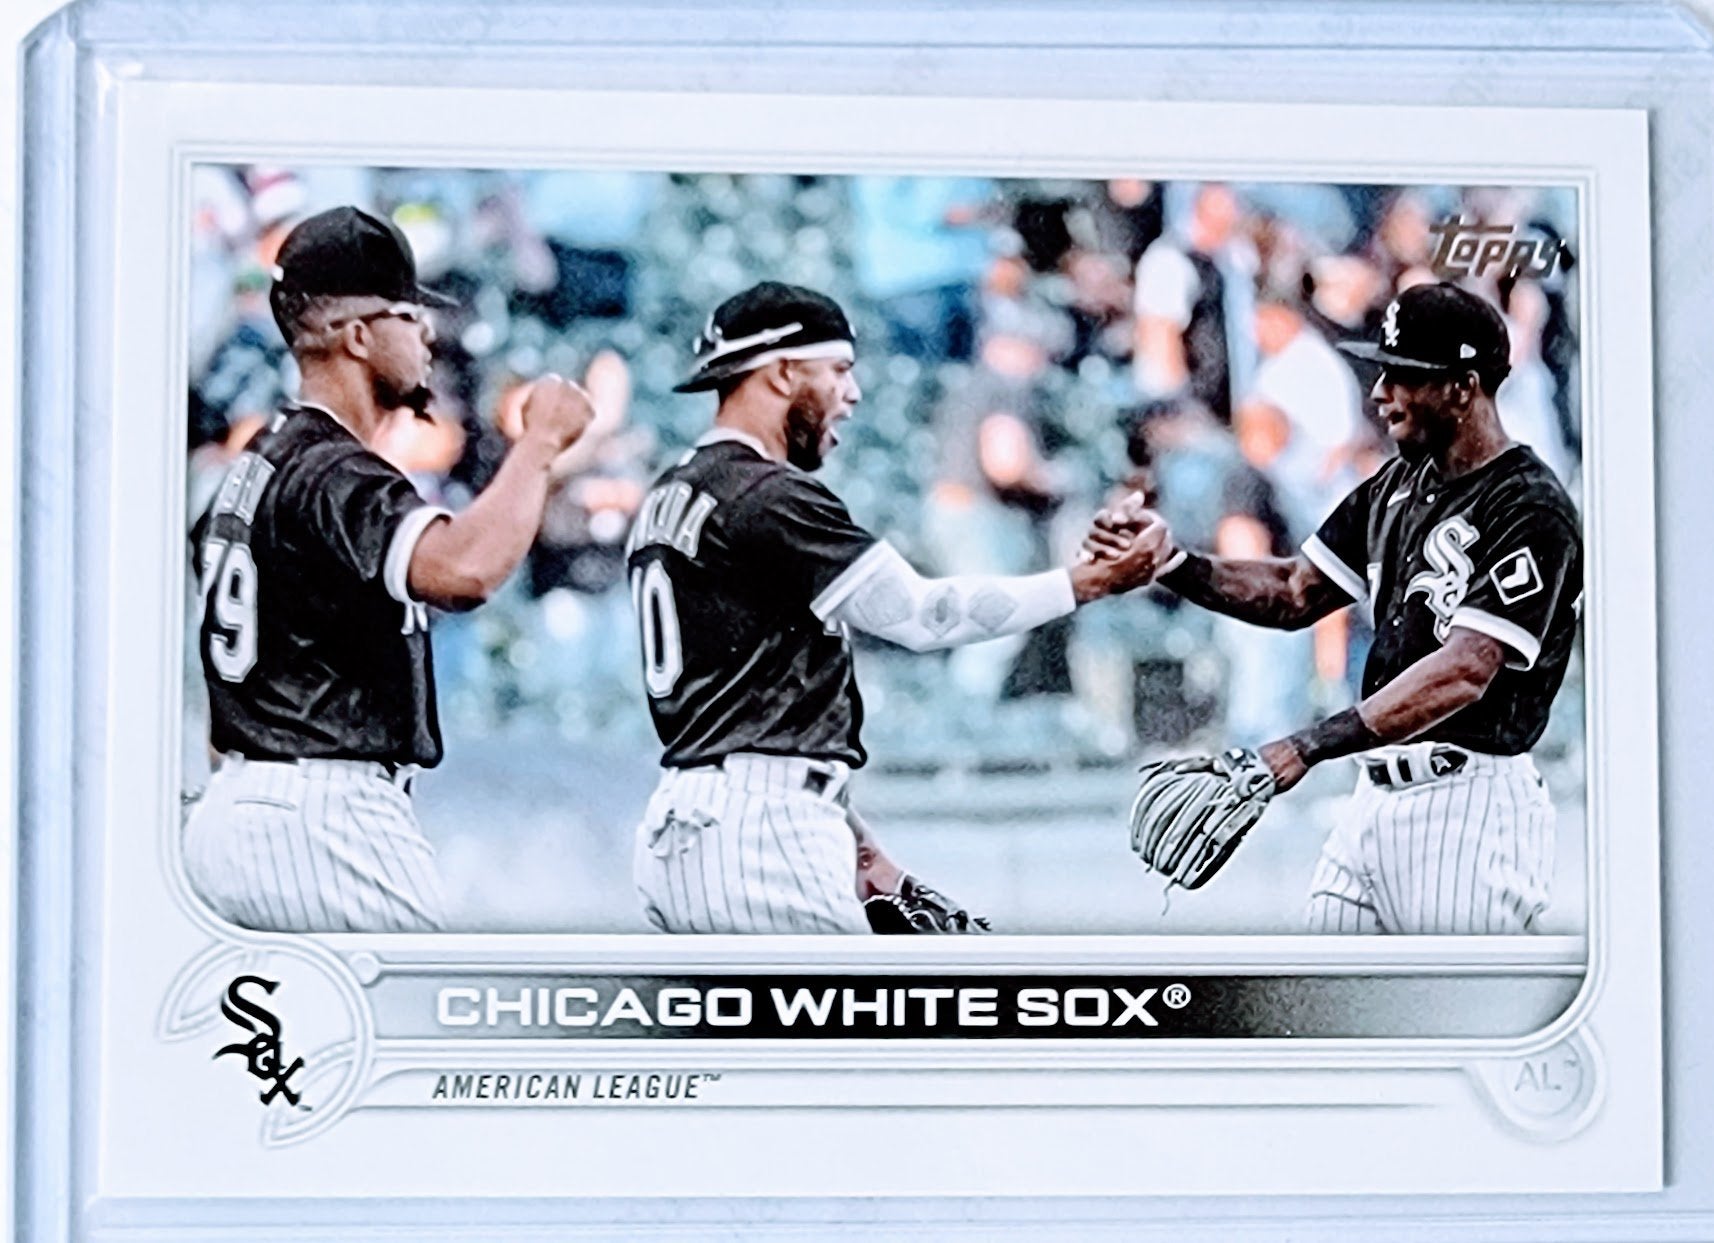 2022 Topps Chicago White Sox Team Baseball Trading Card GRB1 simple Xclusive Collectibles   